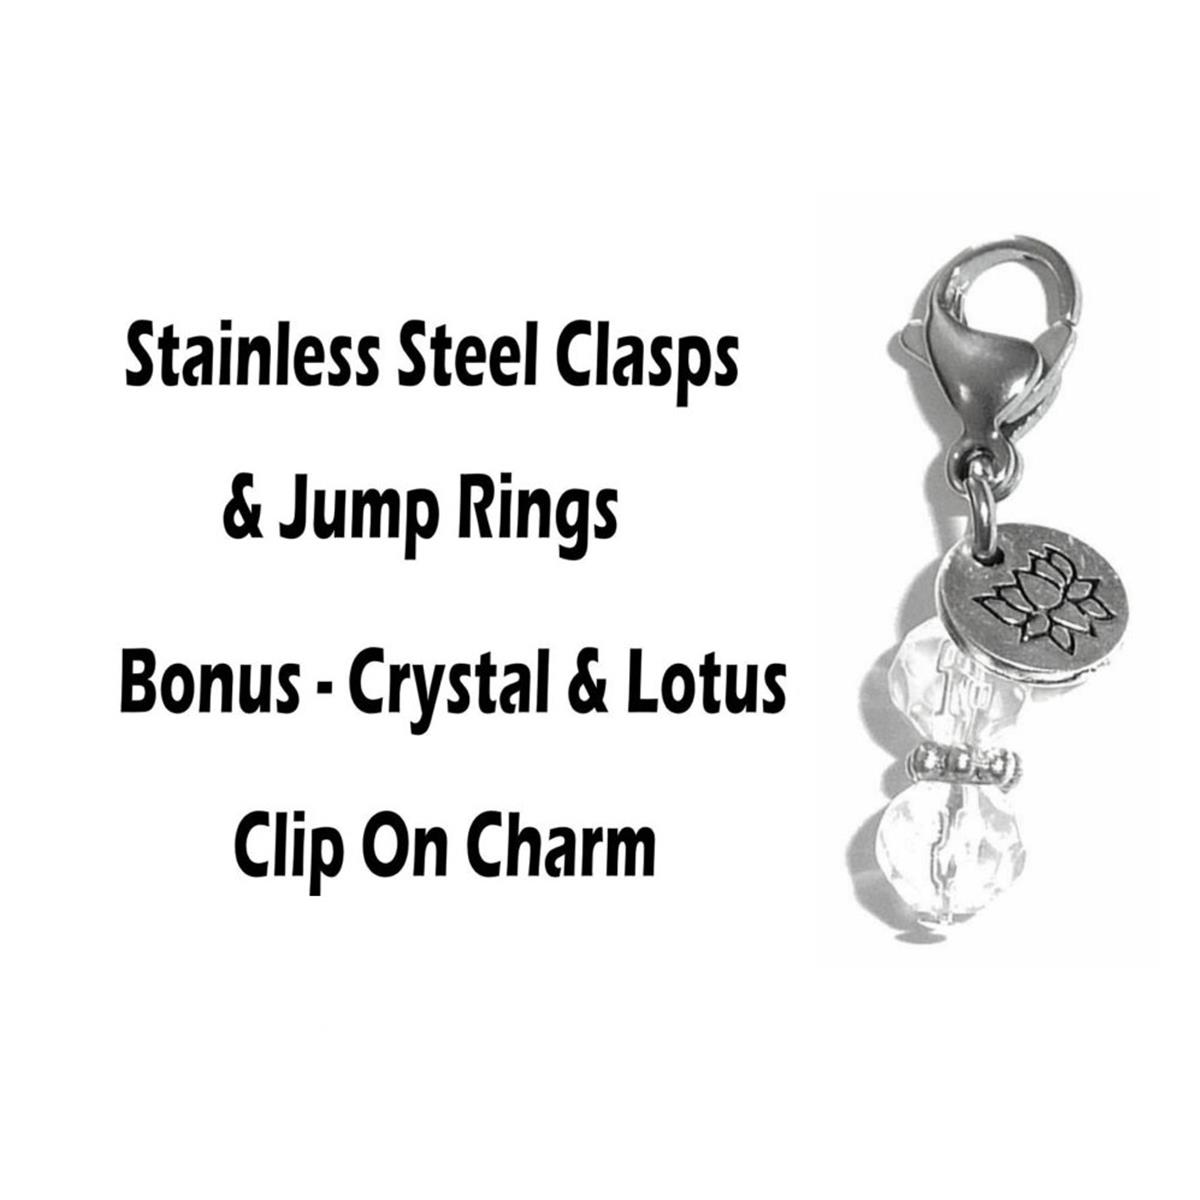 Flower Girl Clip On Charms - Wedding Party Charms Clip On Anywhere